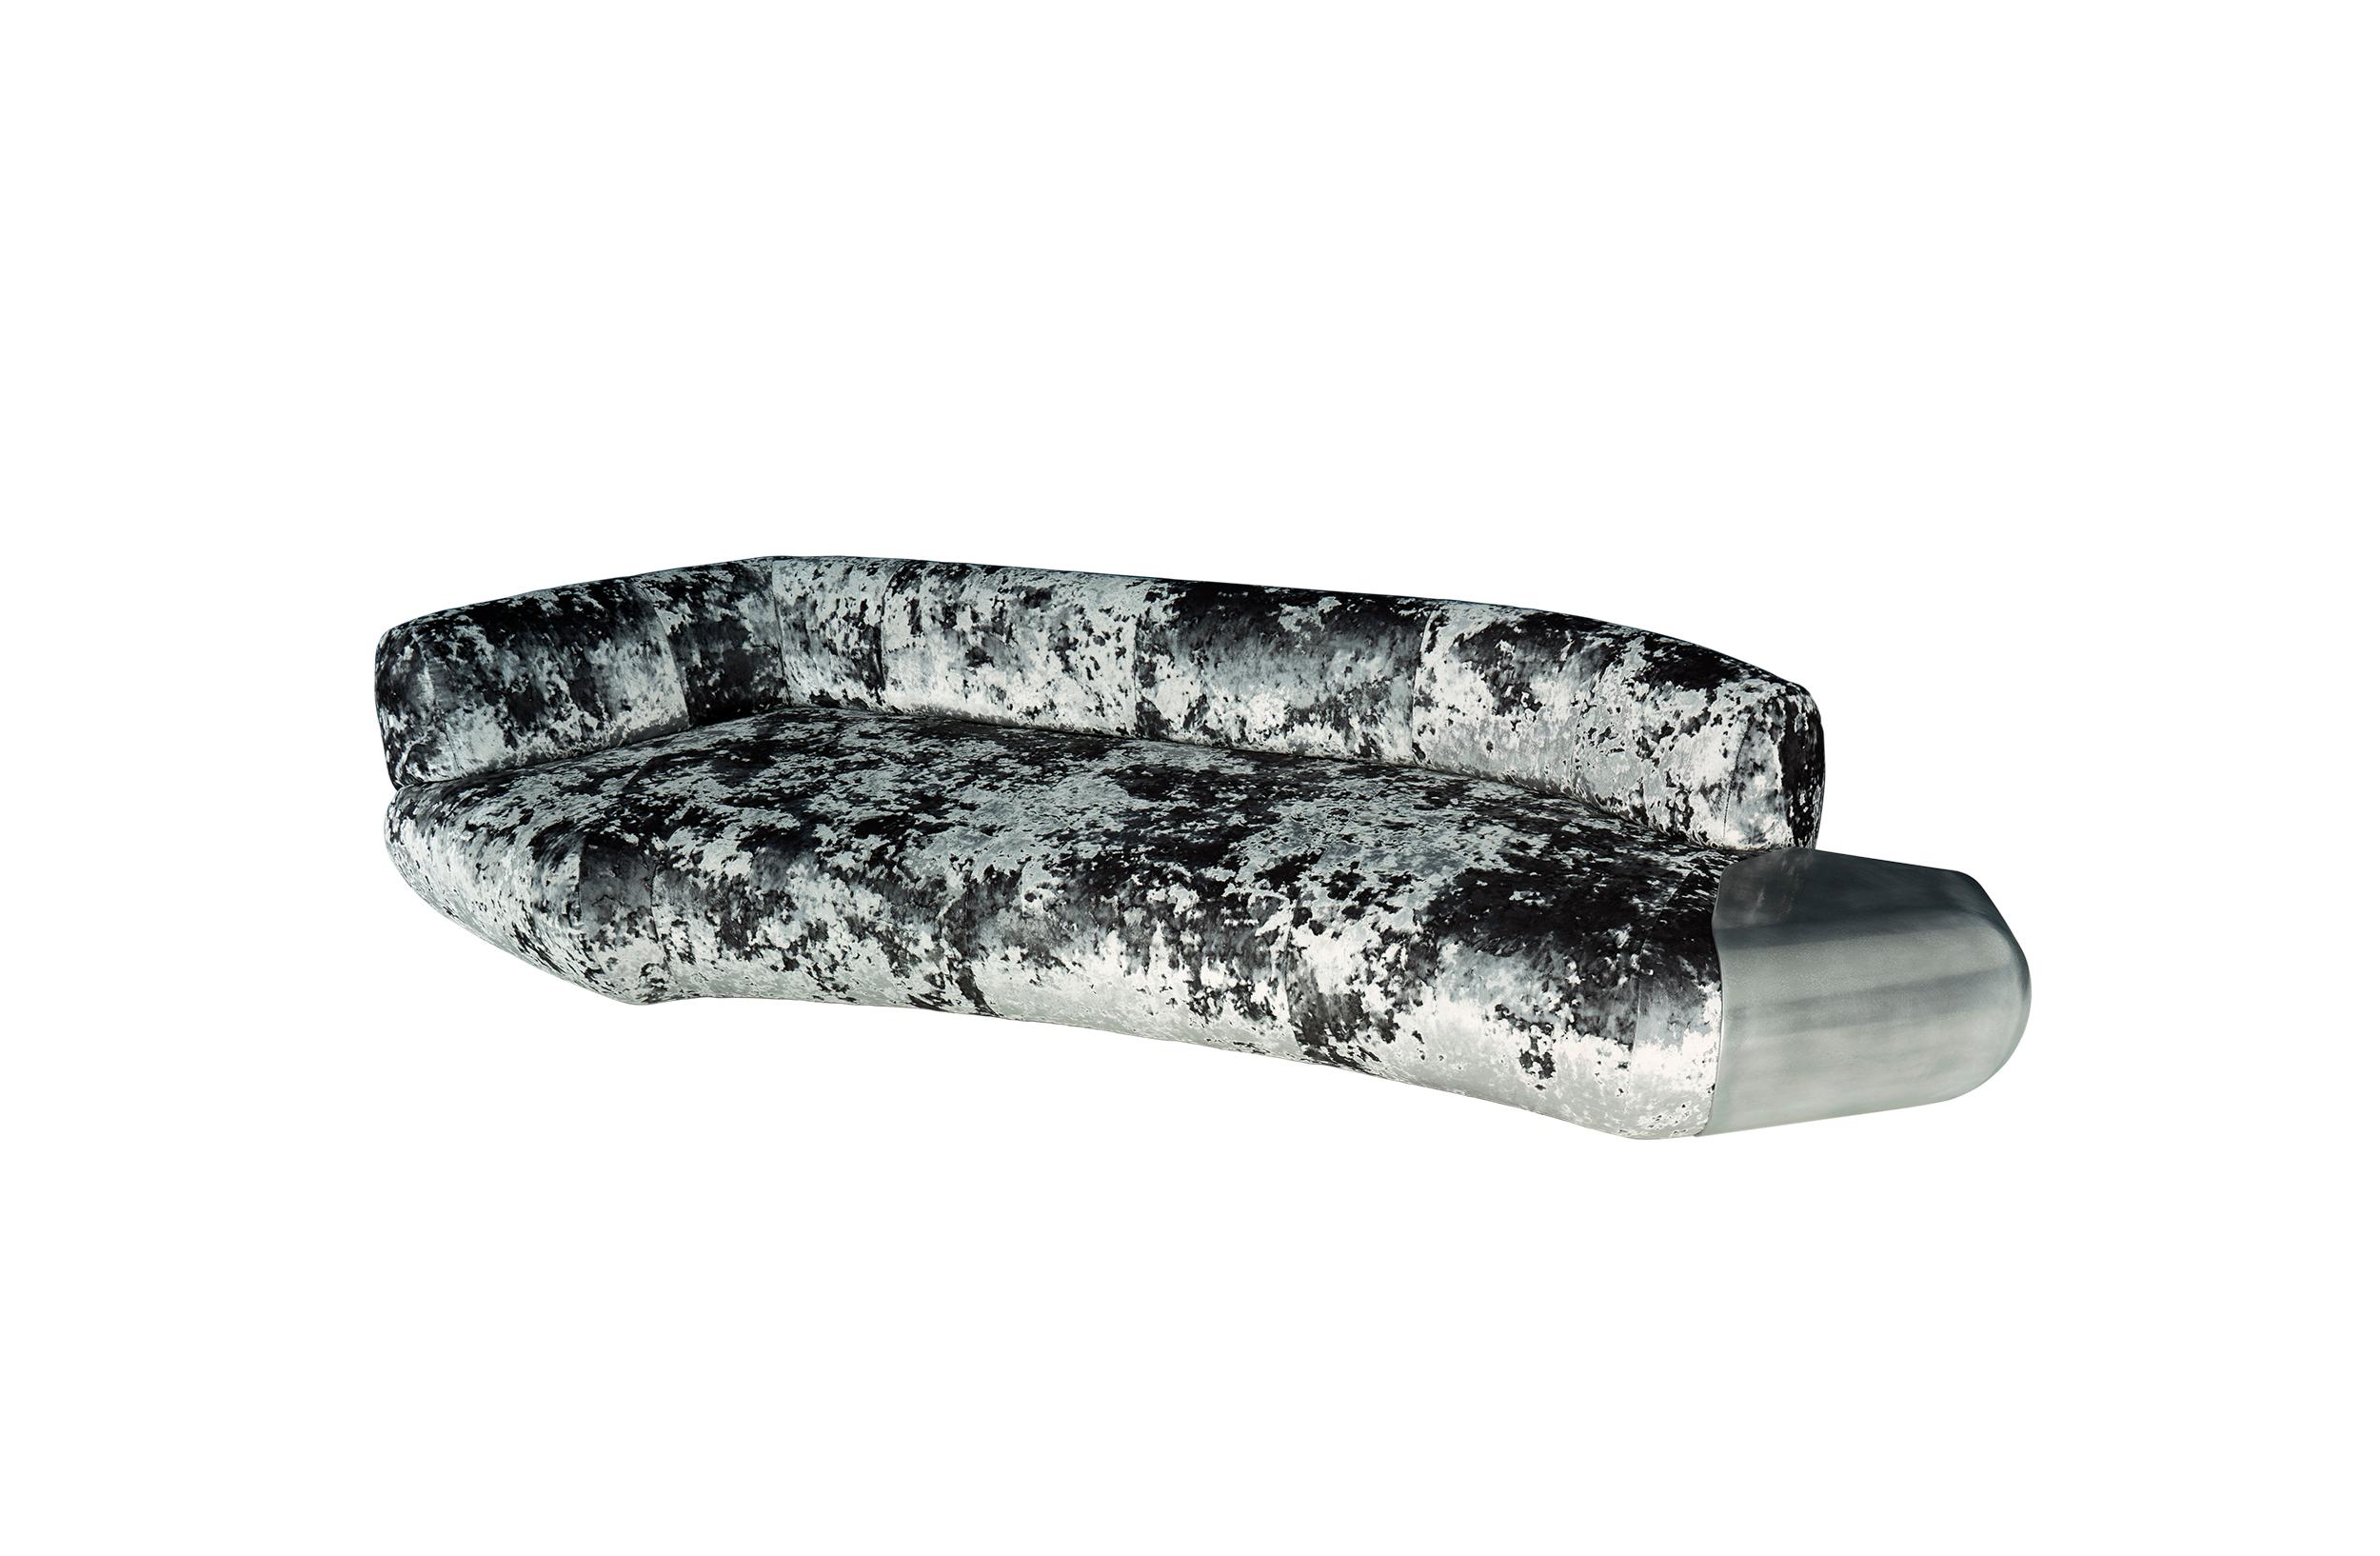 Straight Sofa - 21st century contemporary velvet and cast aluminum sofa

Neat and refined contours, textured velvet, and edgy cast aluminum detail with a nuance of hand-applied patina and brushed effect make this piece especially tempting and